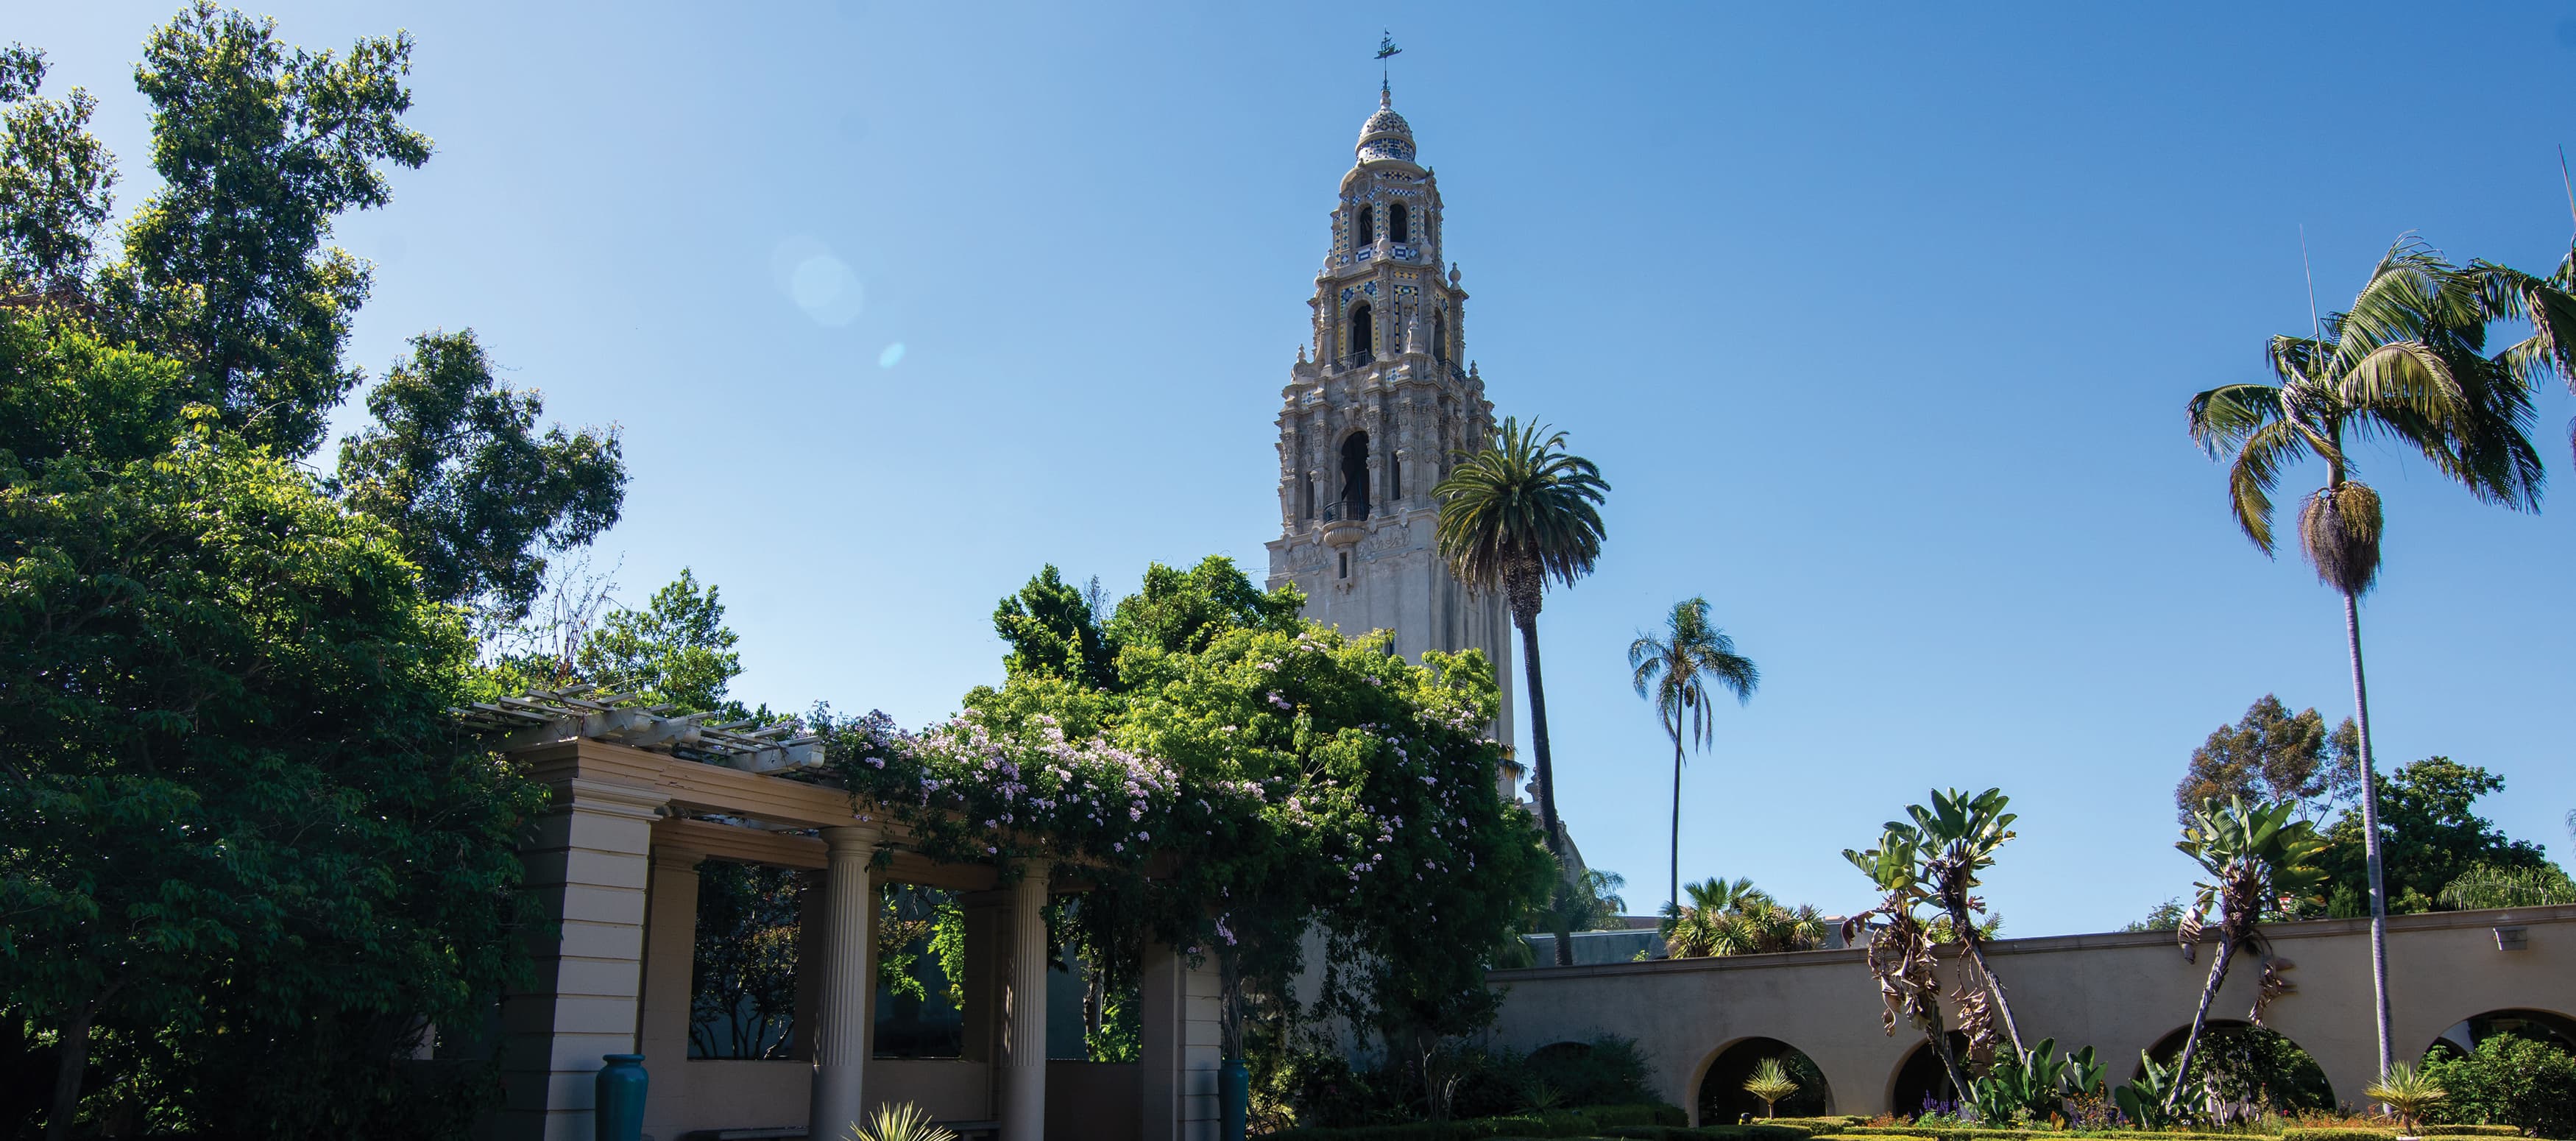 Historical church tower located in Balboa Park, San Diego